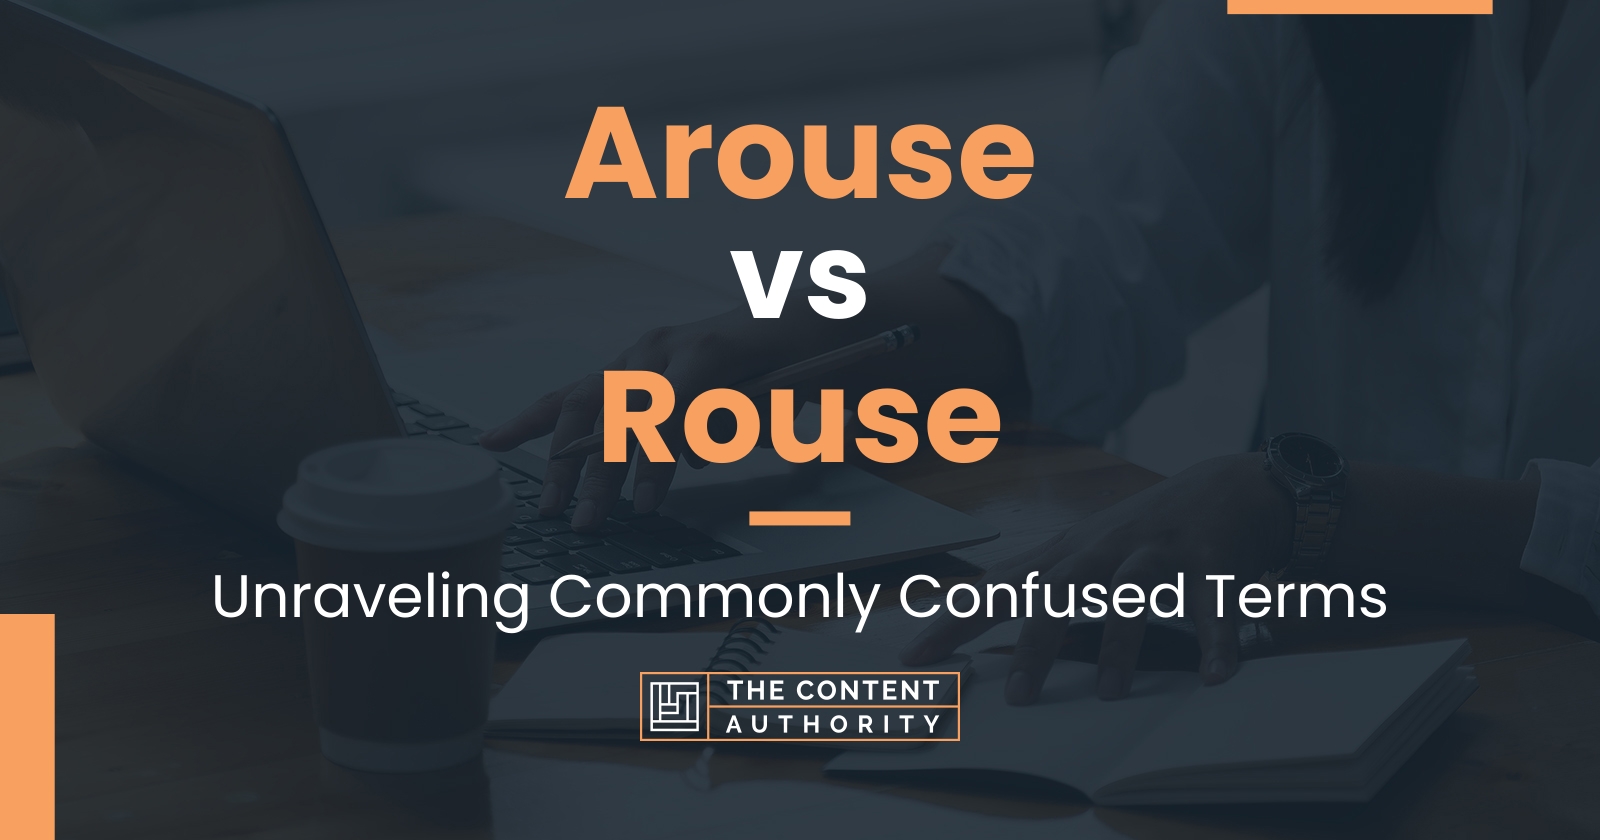 Arouse vs Rouse: Unraveling Commonly Confused Terms